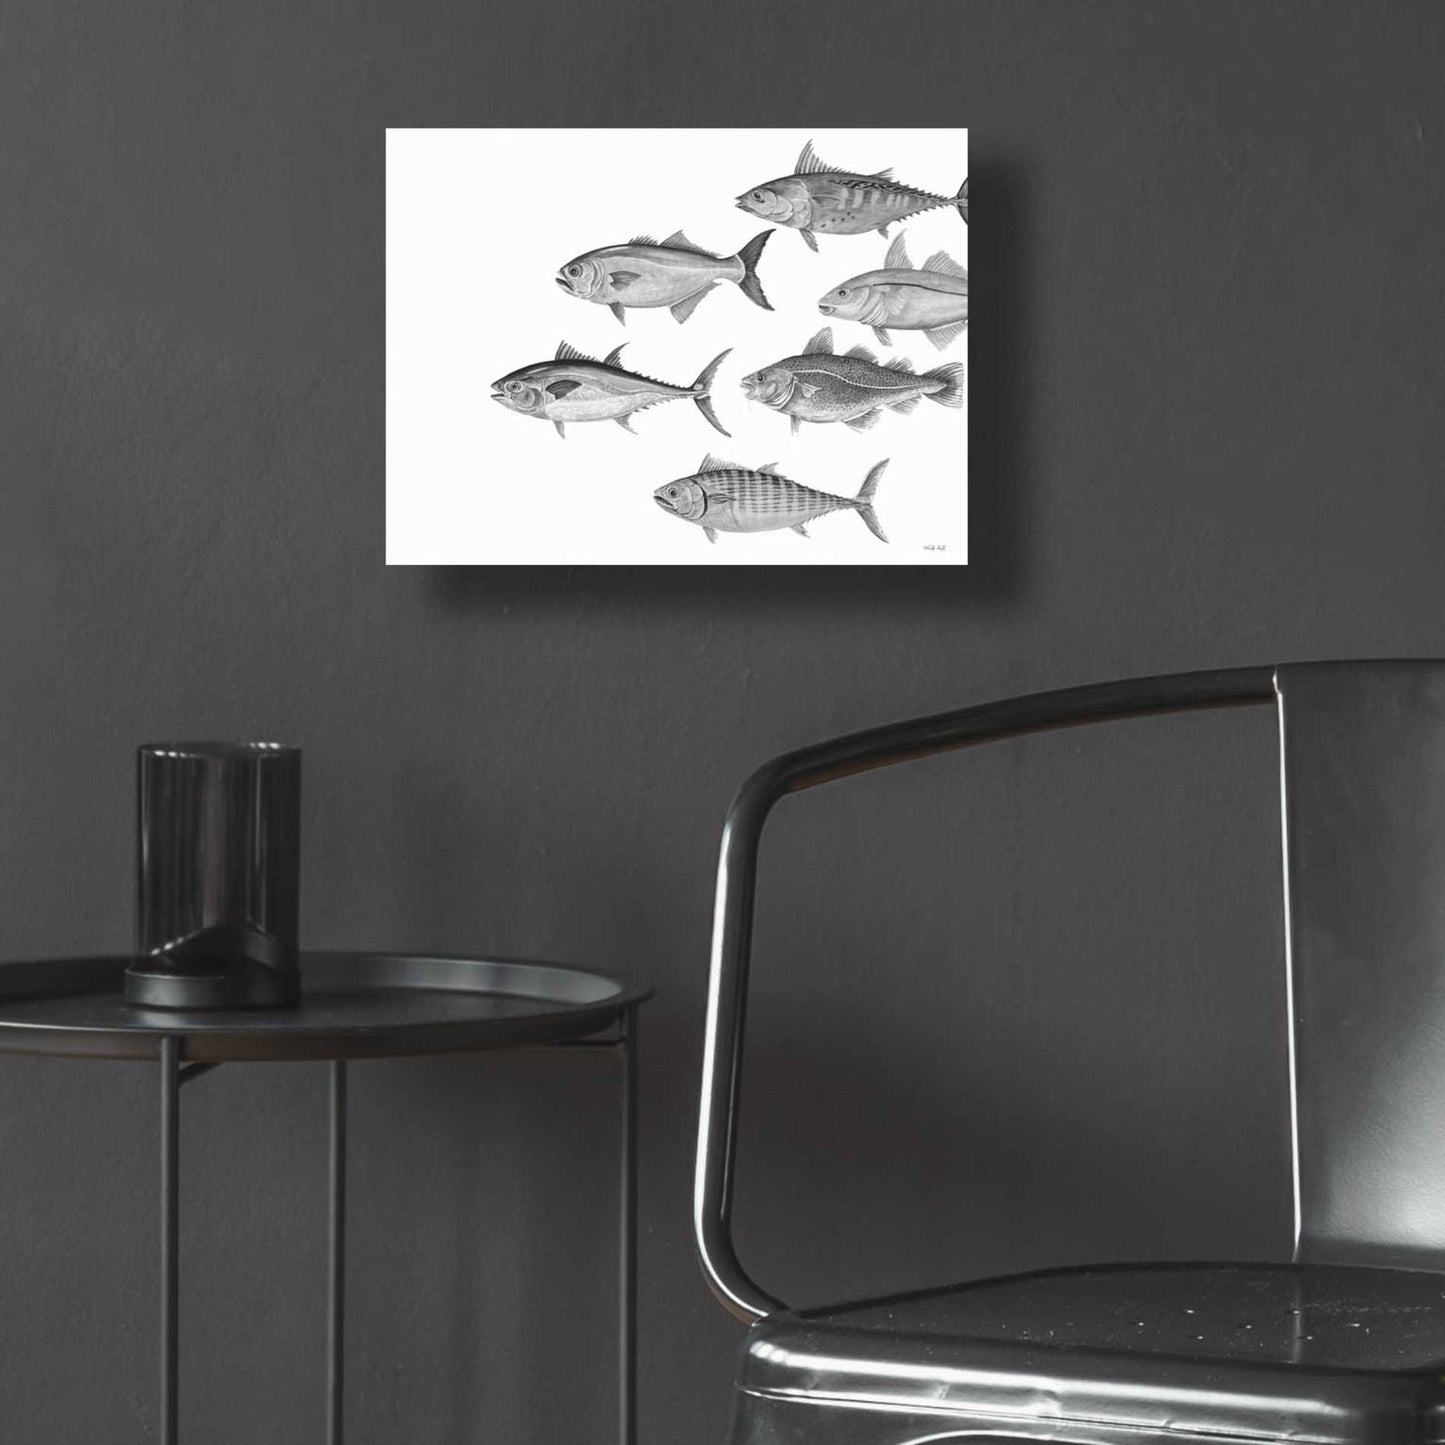 Epic Art 'Variety of Fish II' by Cindy Jacobs, Acrylic Glass Wall Art,16x12